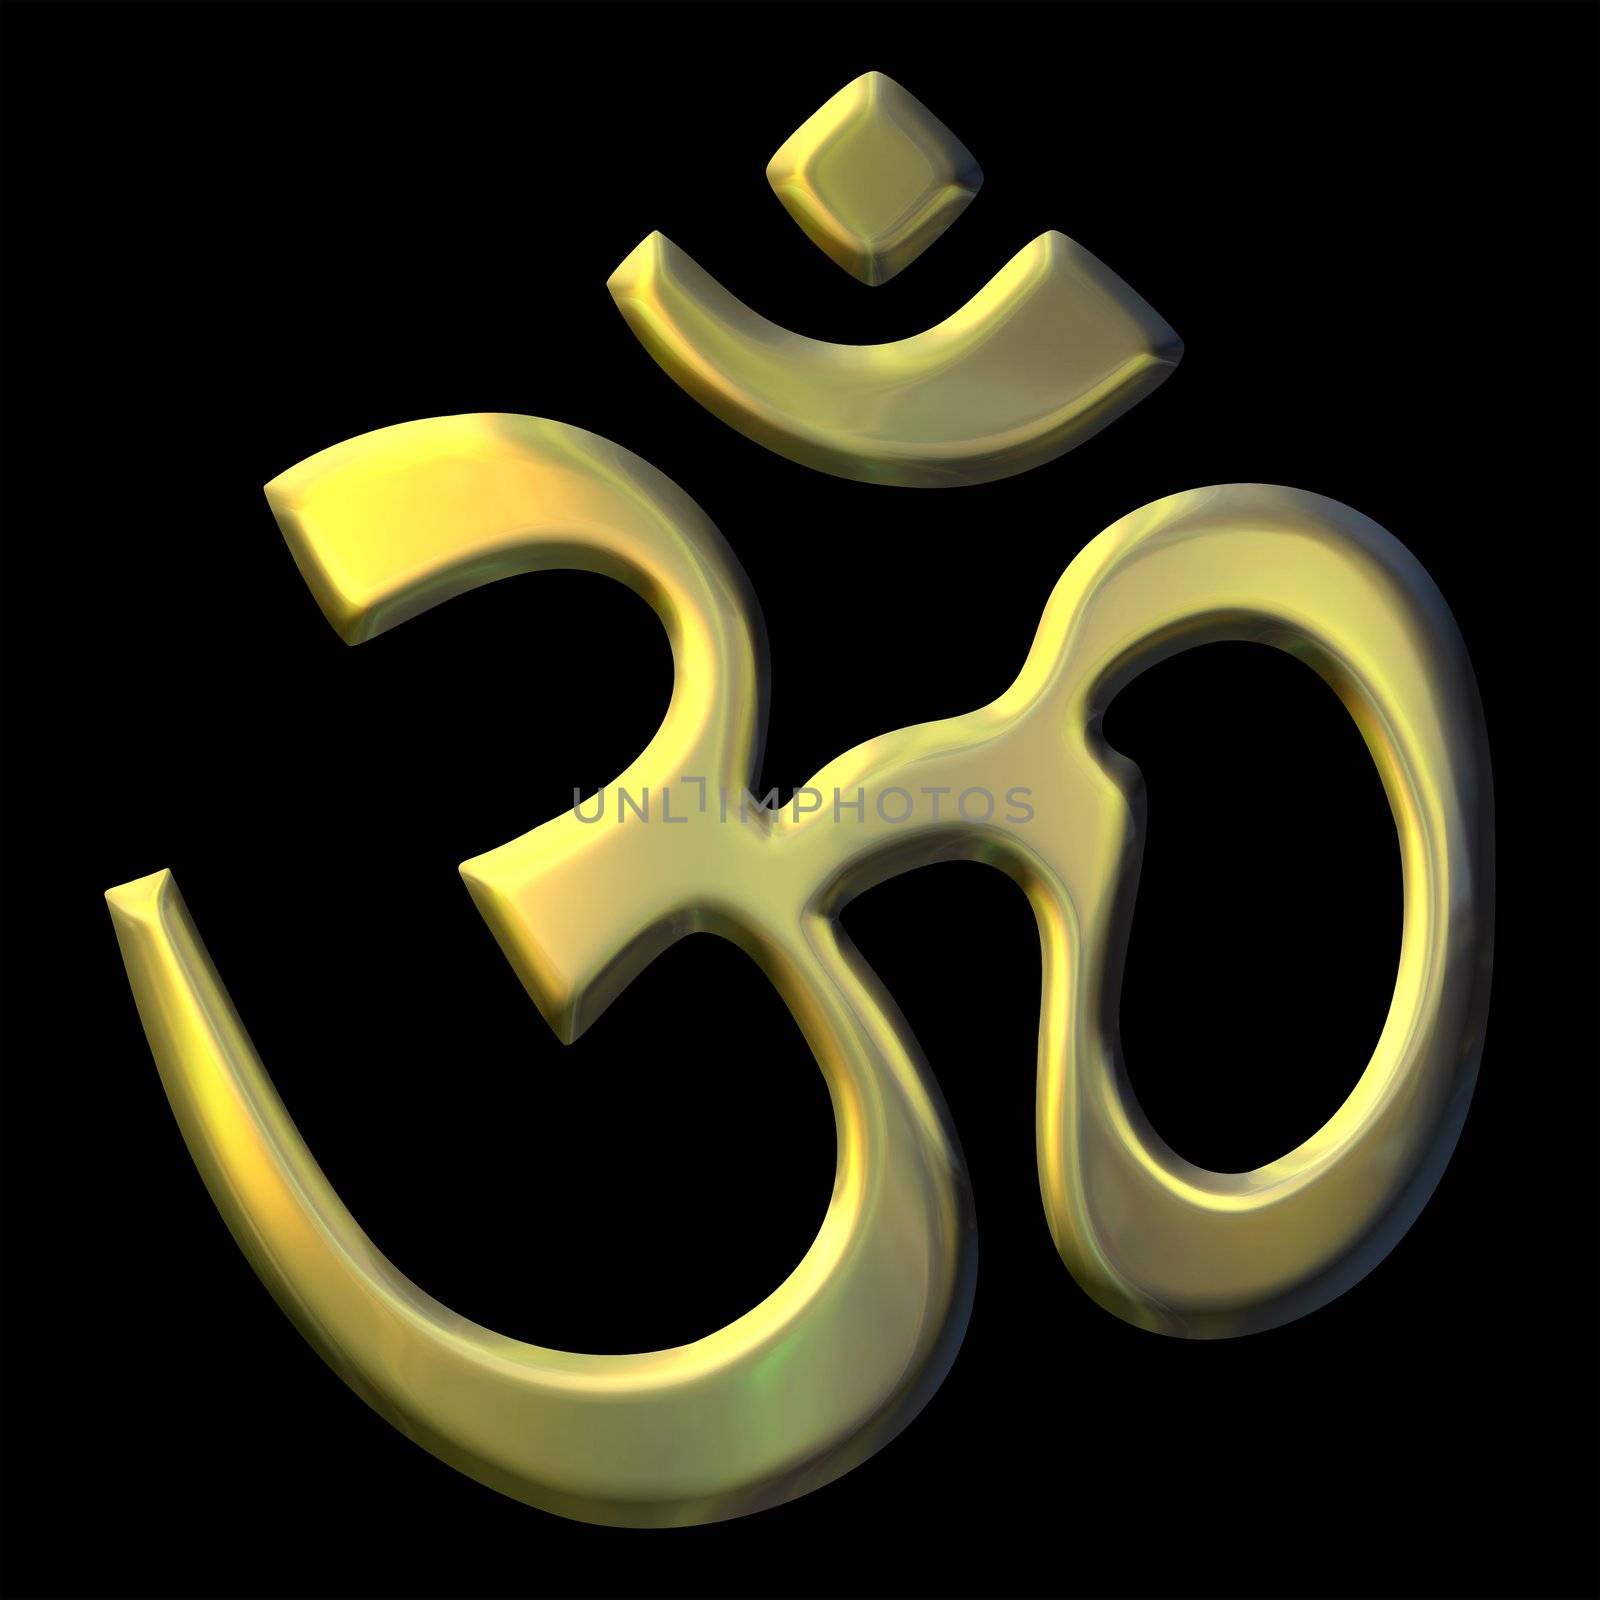 an illustration of the golden sacred syllable Aum